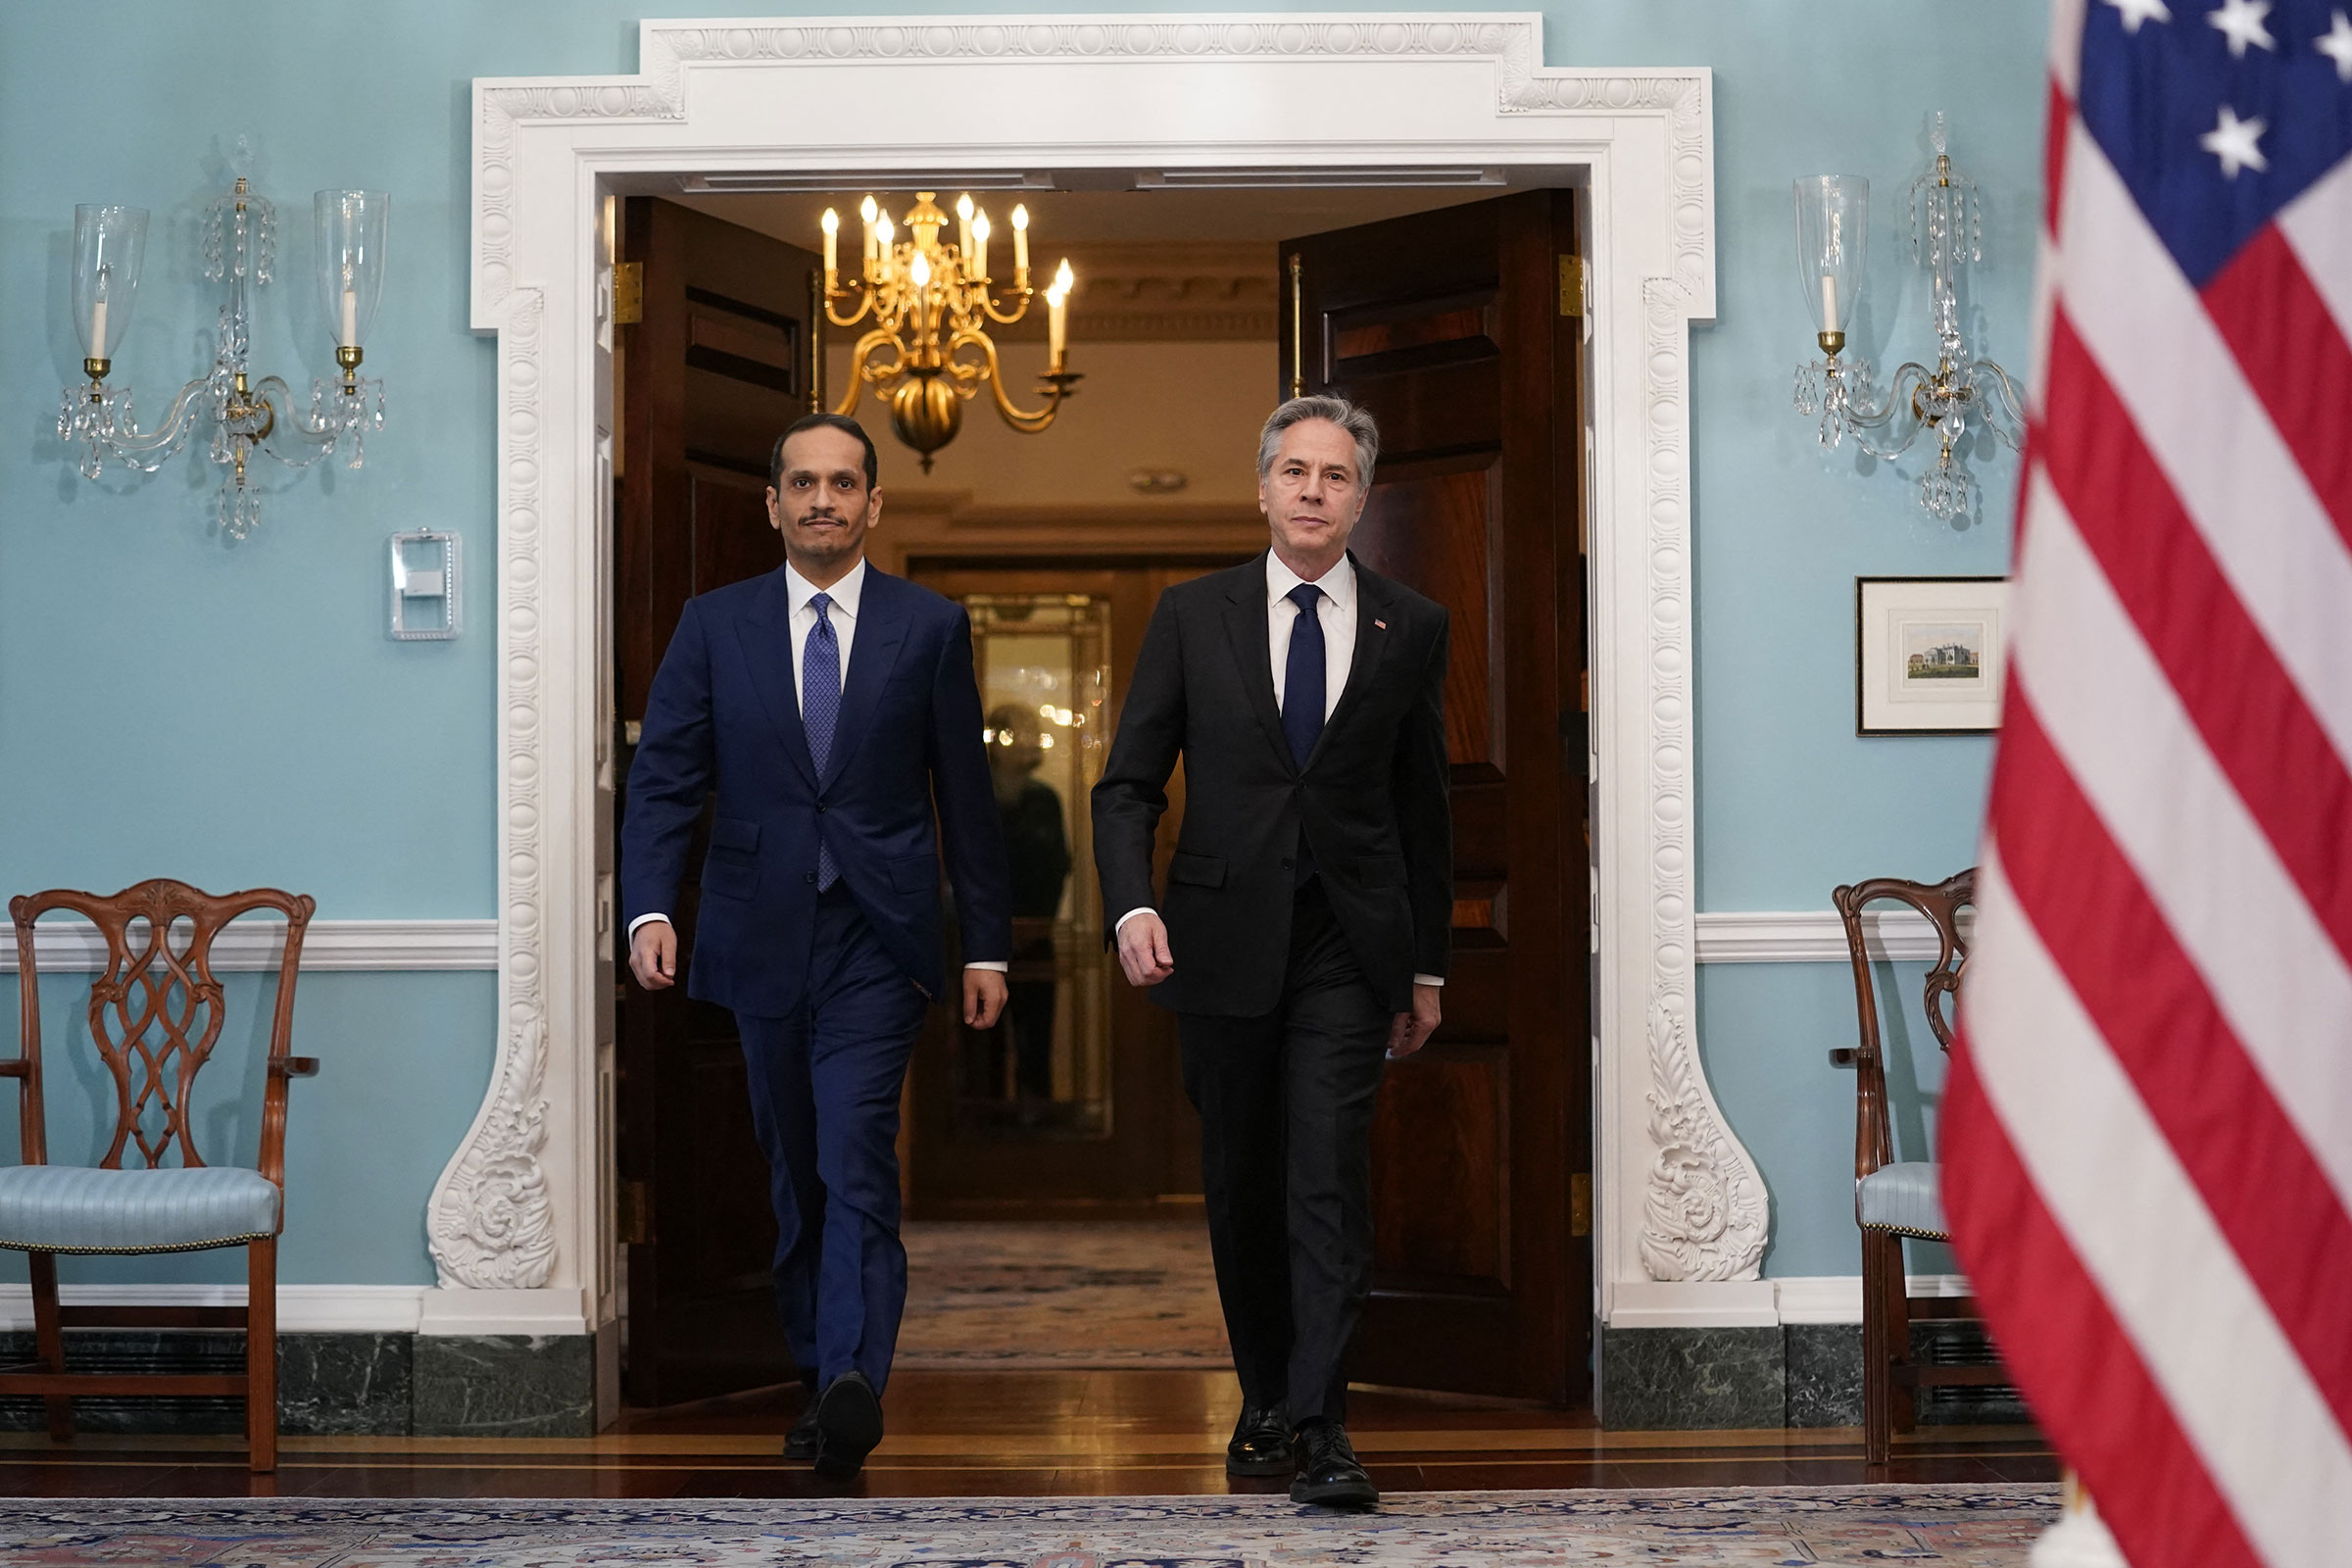 US Secretary of State Antony Blinken and Qatari Prime Minister and Minister of Foreign Affairs Sheikh Mohammed bin Abdulrahman bin Jassim al-Thani arrive to speak to the press in the Treaty Room of the State Department in Washington, DC, on March 5.